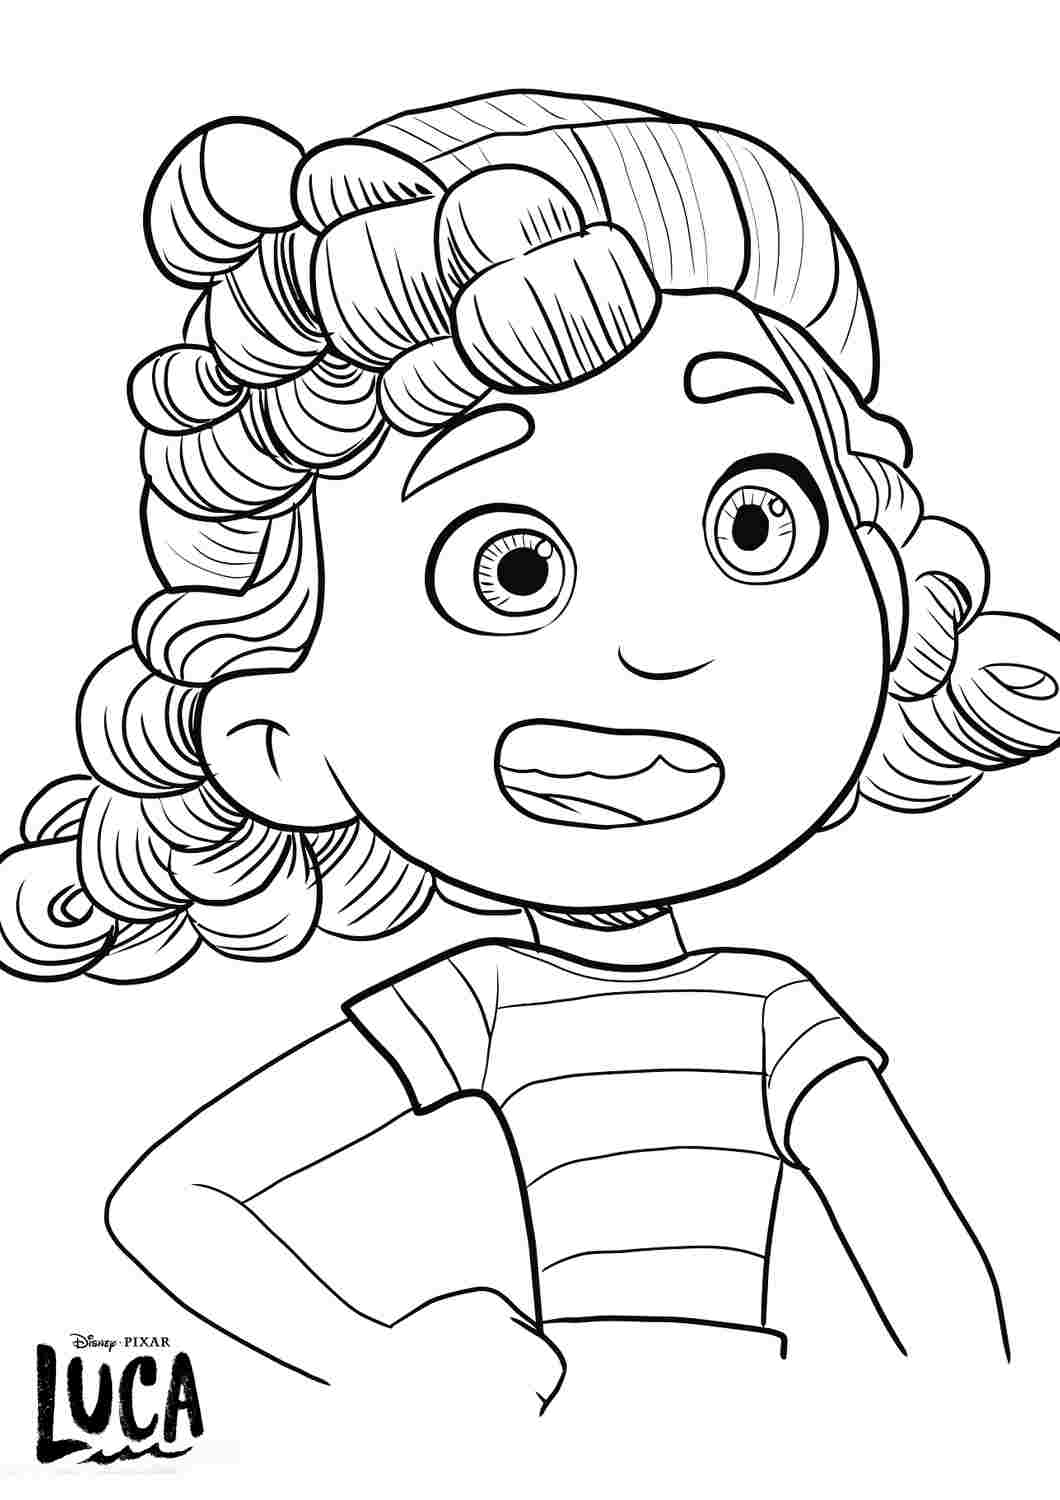 Luca 5 For Kids Coloring Page